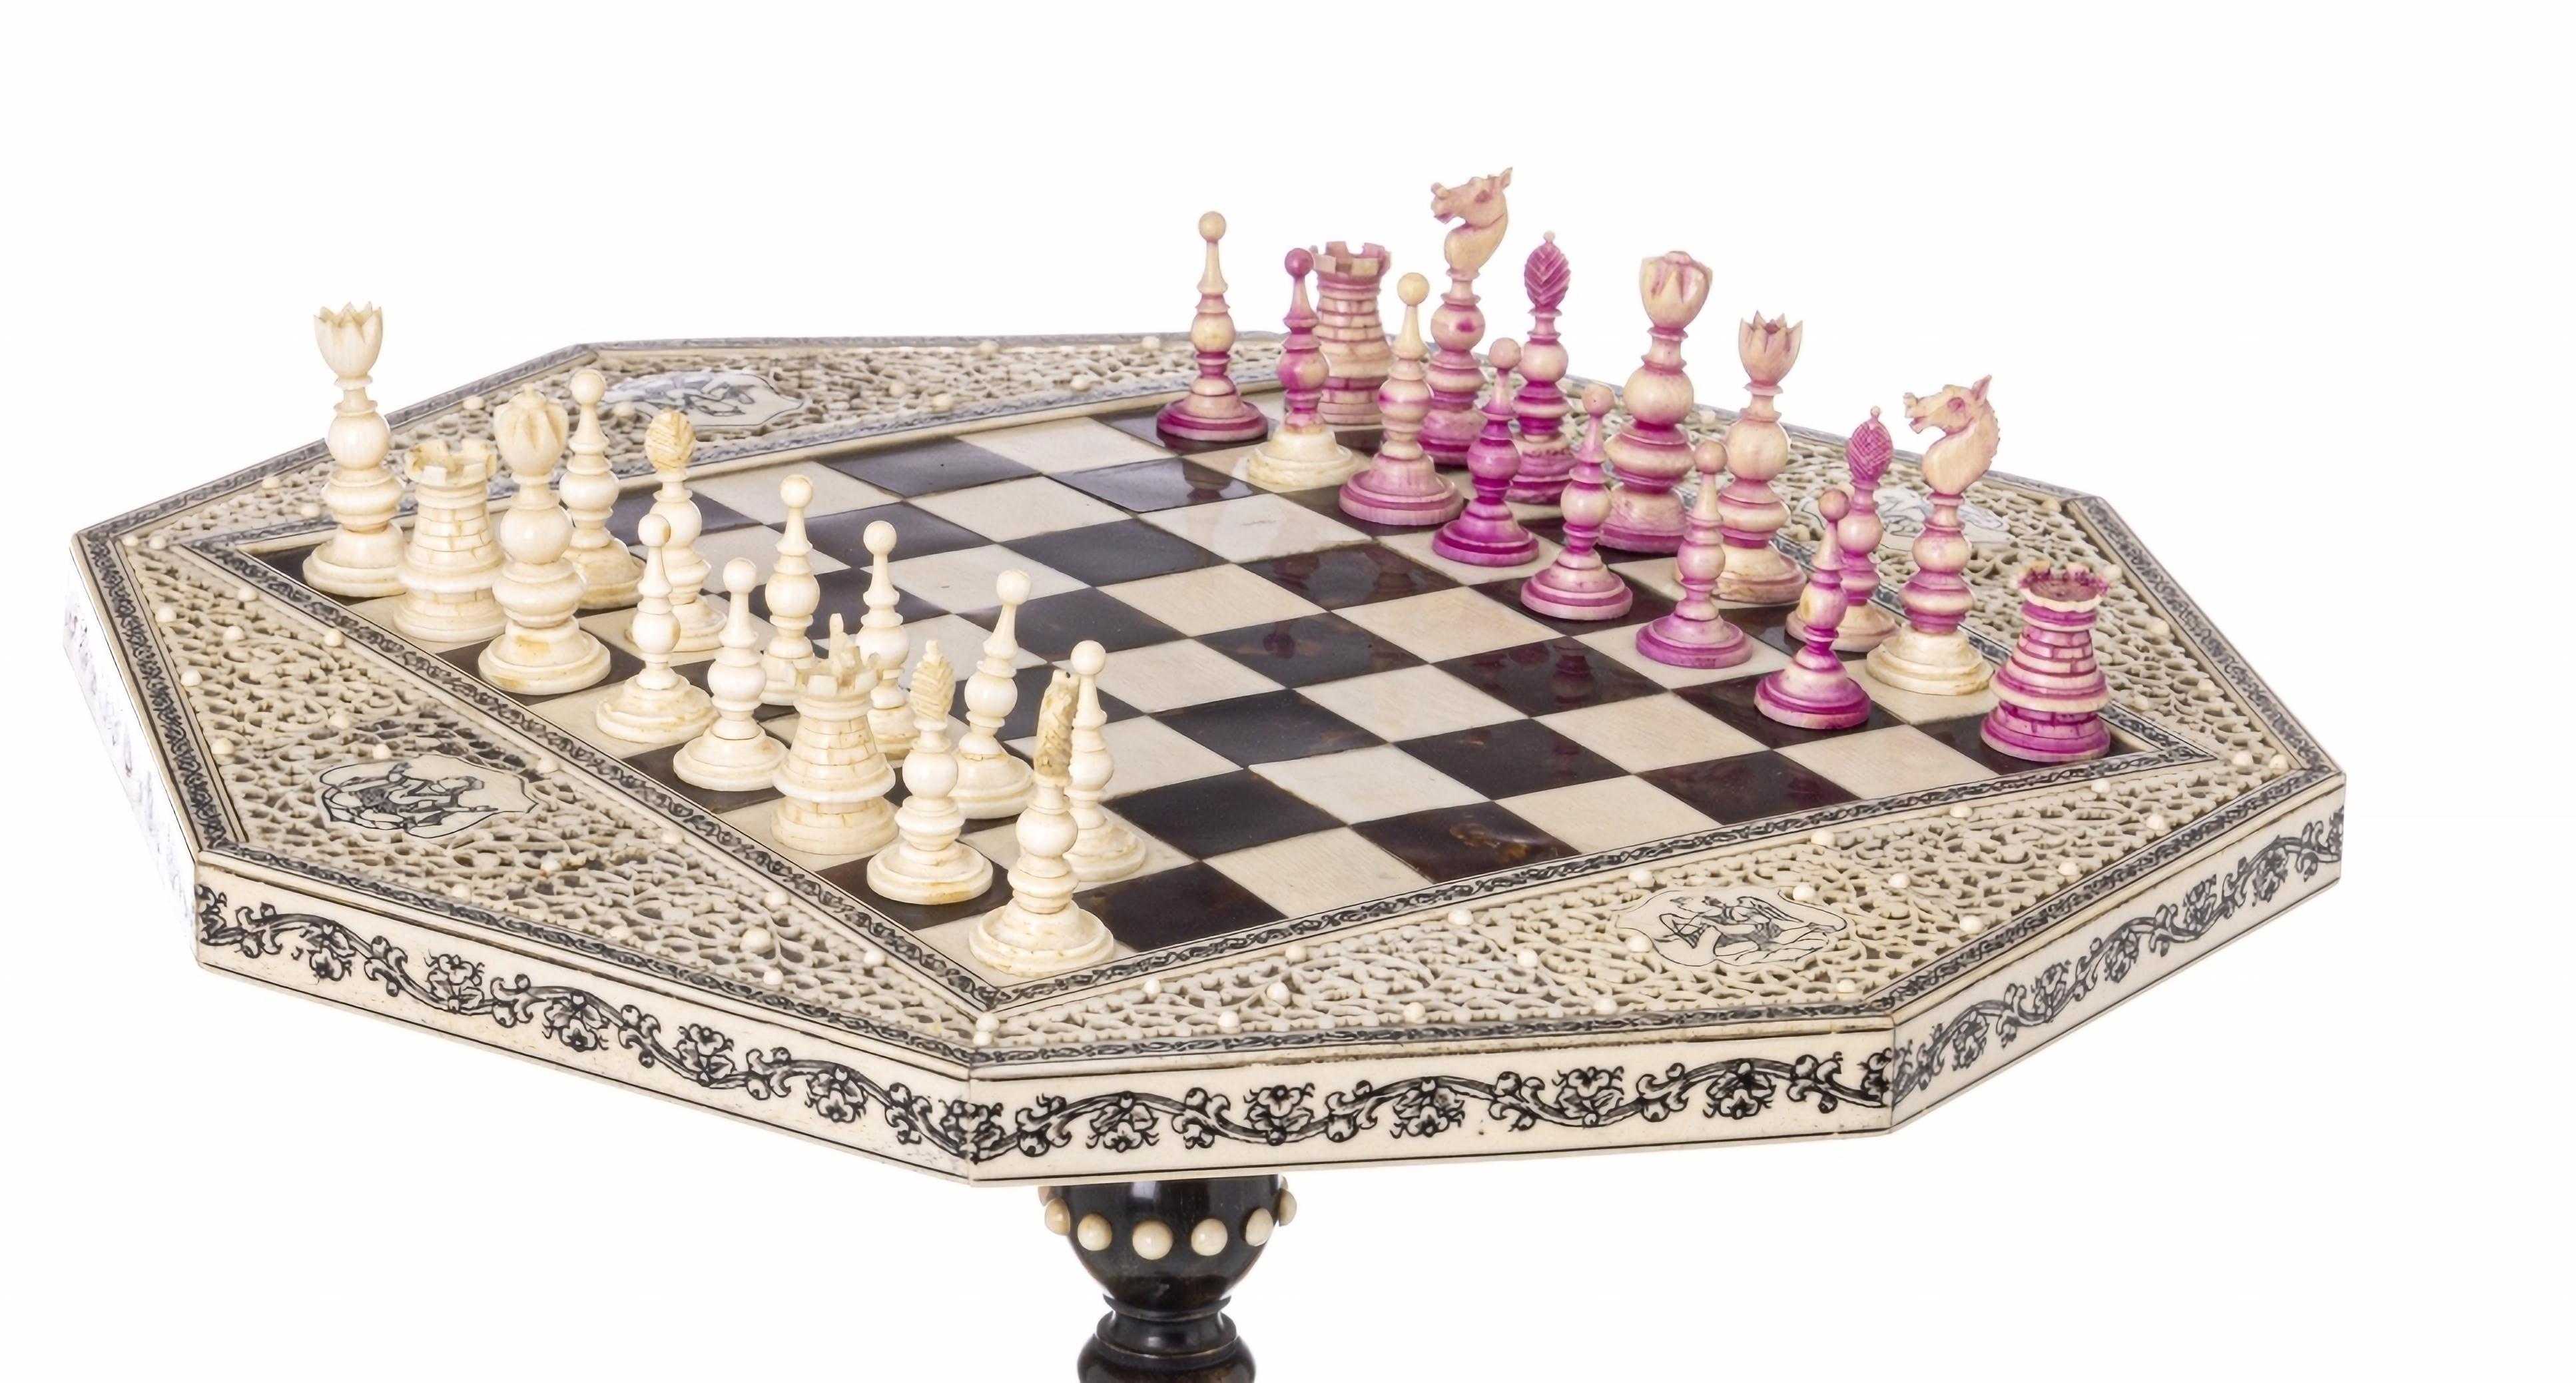 Hand-Crafted MINIATURE GAME TABLE WITH CHESS PIECES  19th Century Anglo-Indian  For Sale